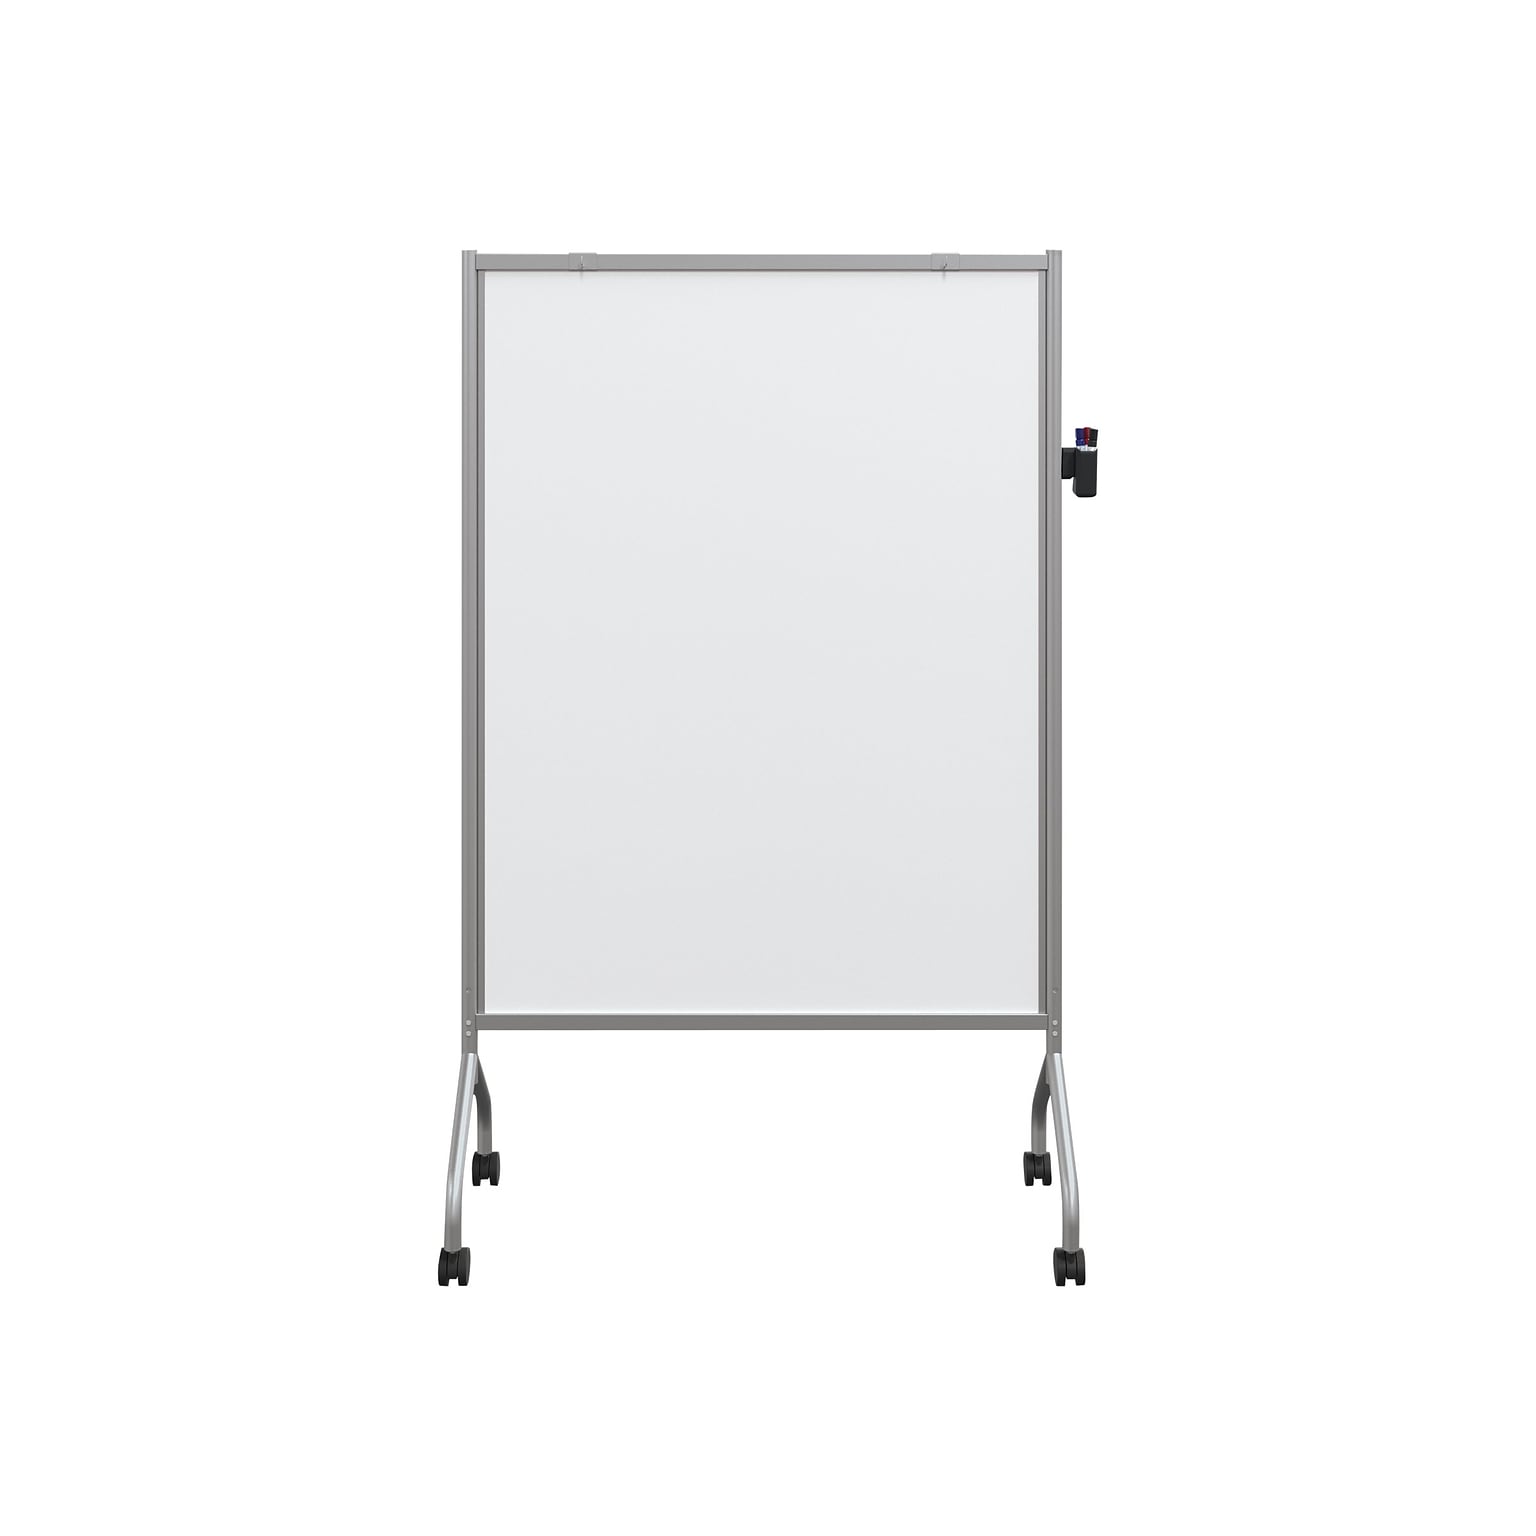 Essentials by Balt Mobile Magnetic Dry-Erase Whiteboard, Anodized Aluminum Frame, 6 x 4 (62542)